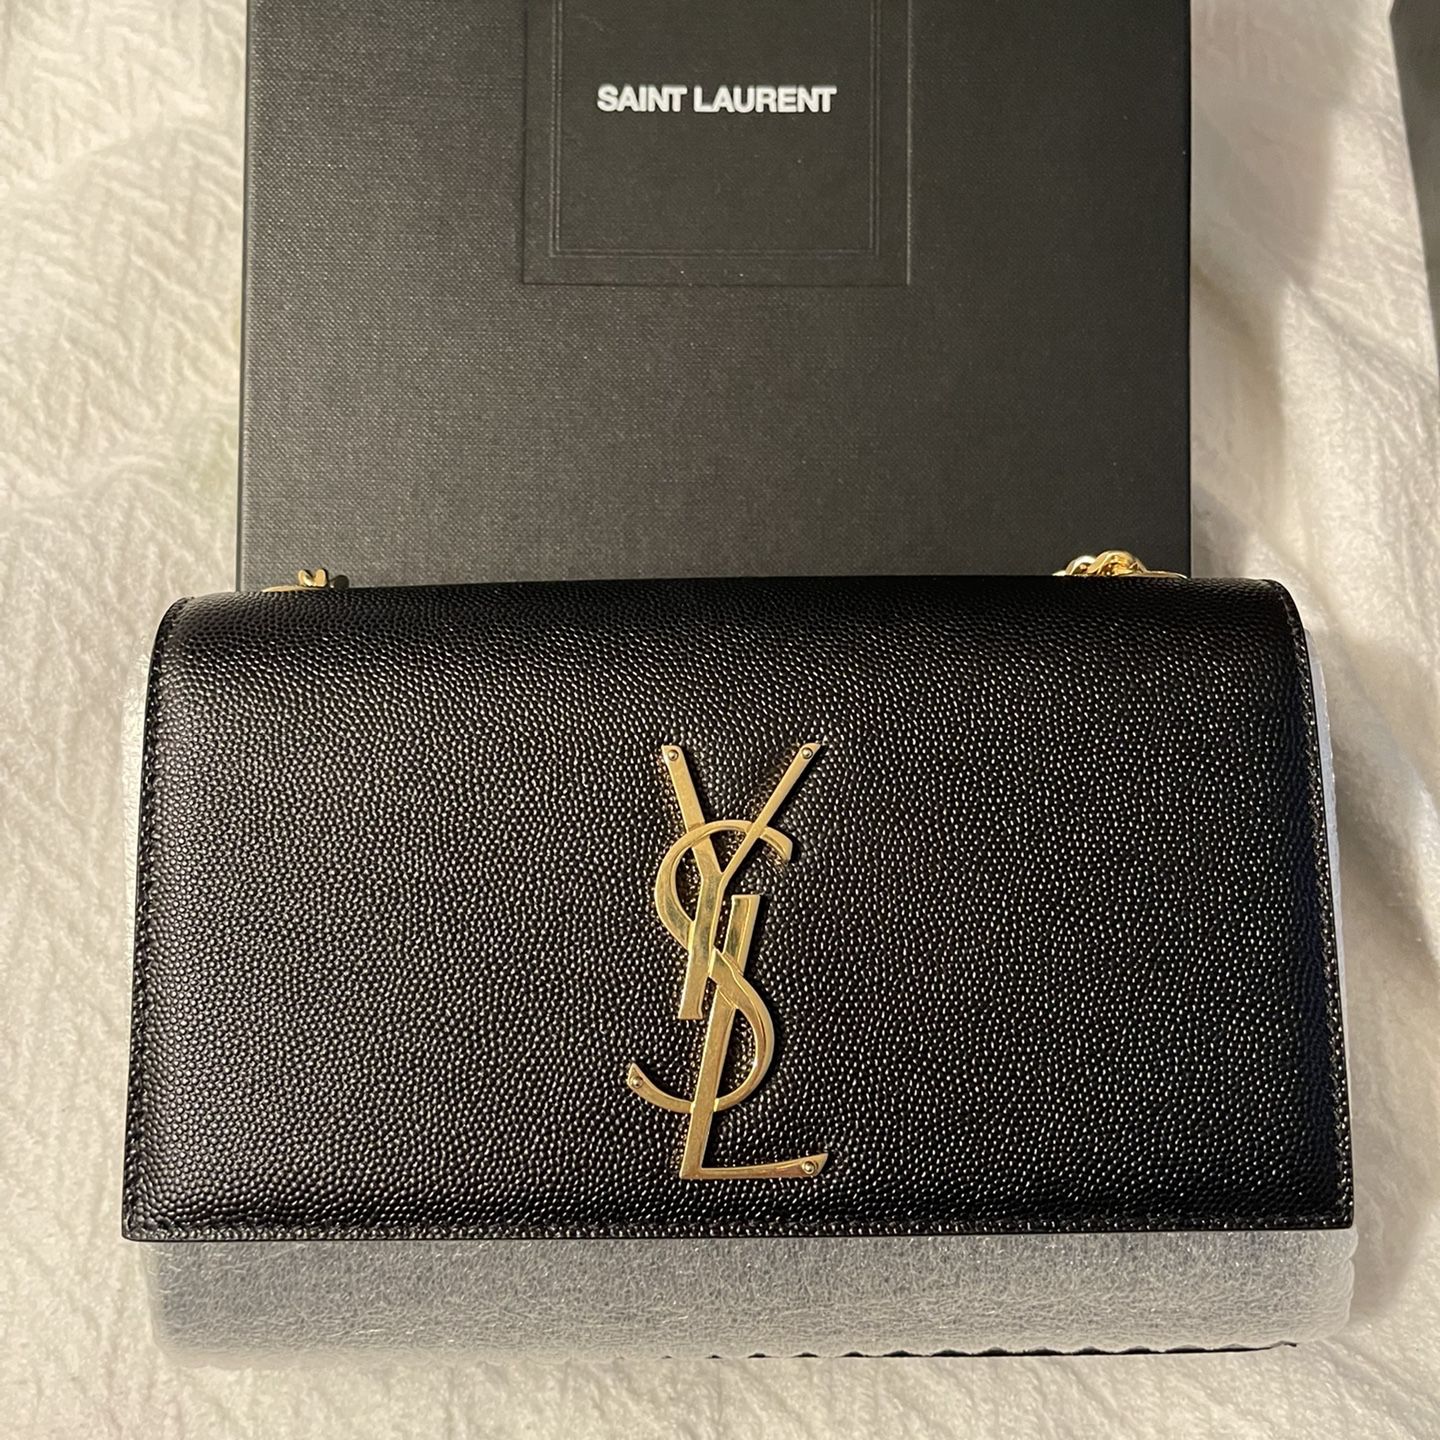 YSl Heels Size 40.5 With Matching Clutch for Sale in Columbia, SC - OfferUp